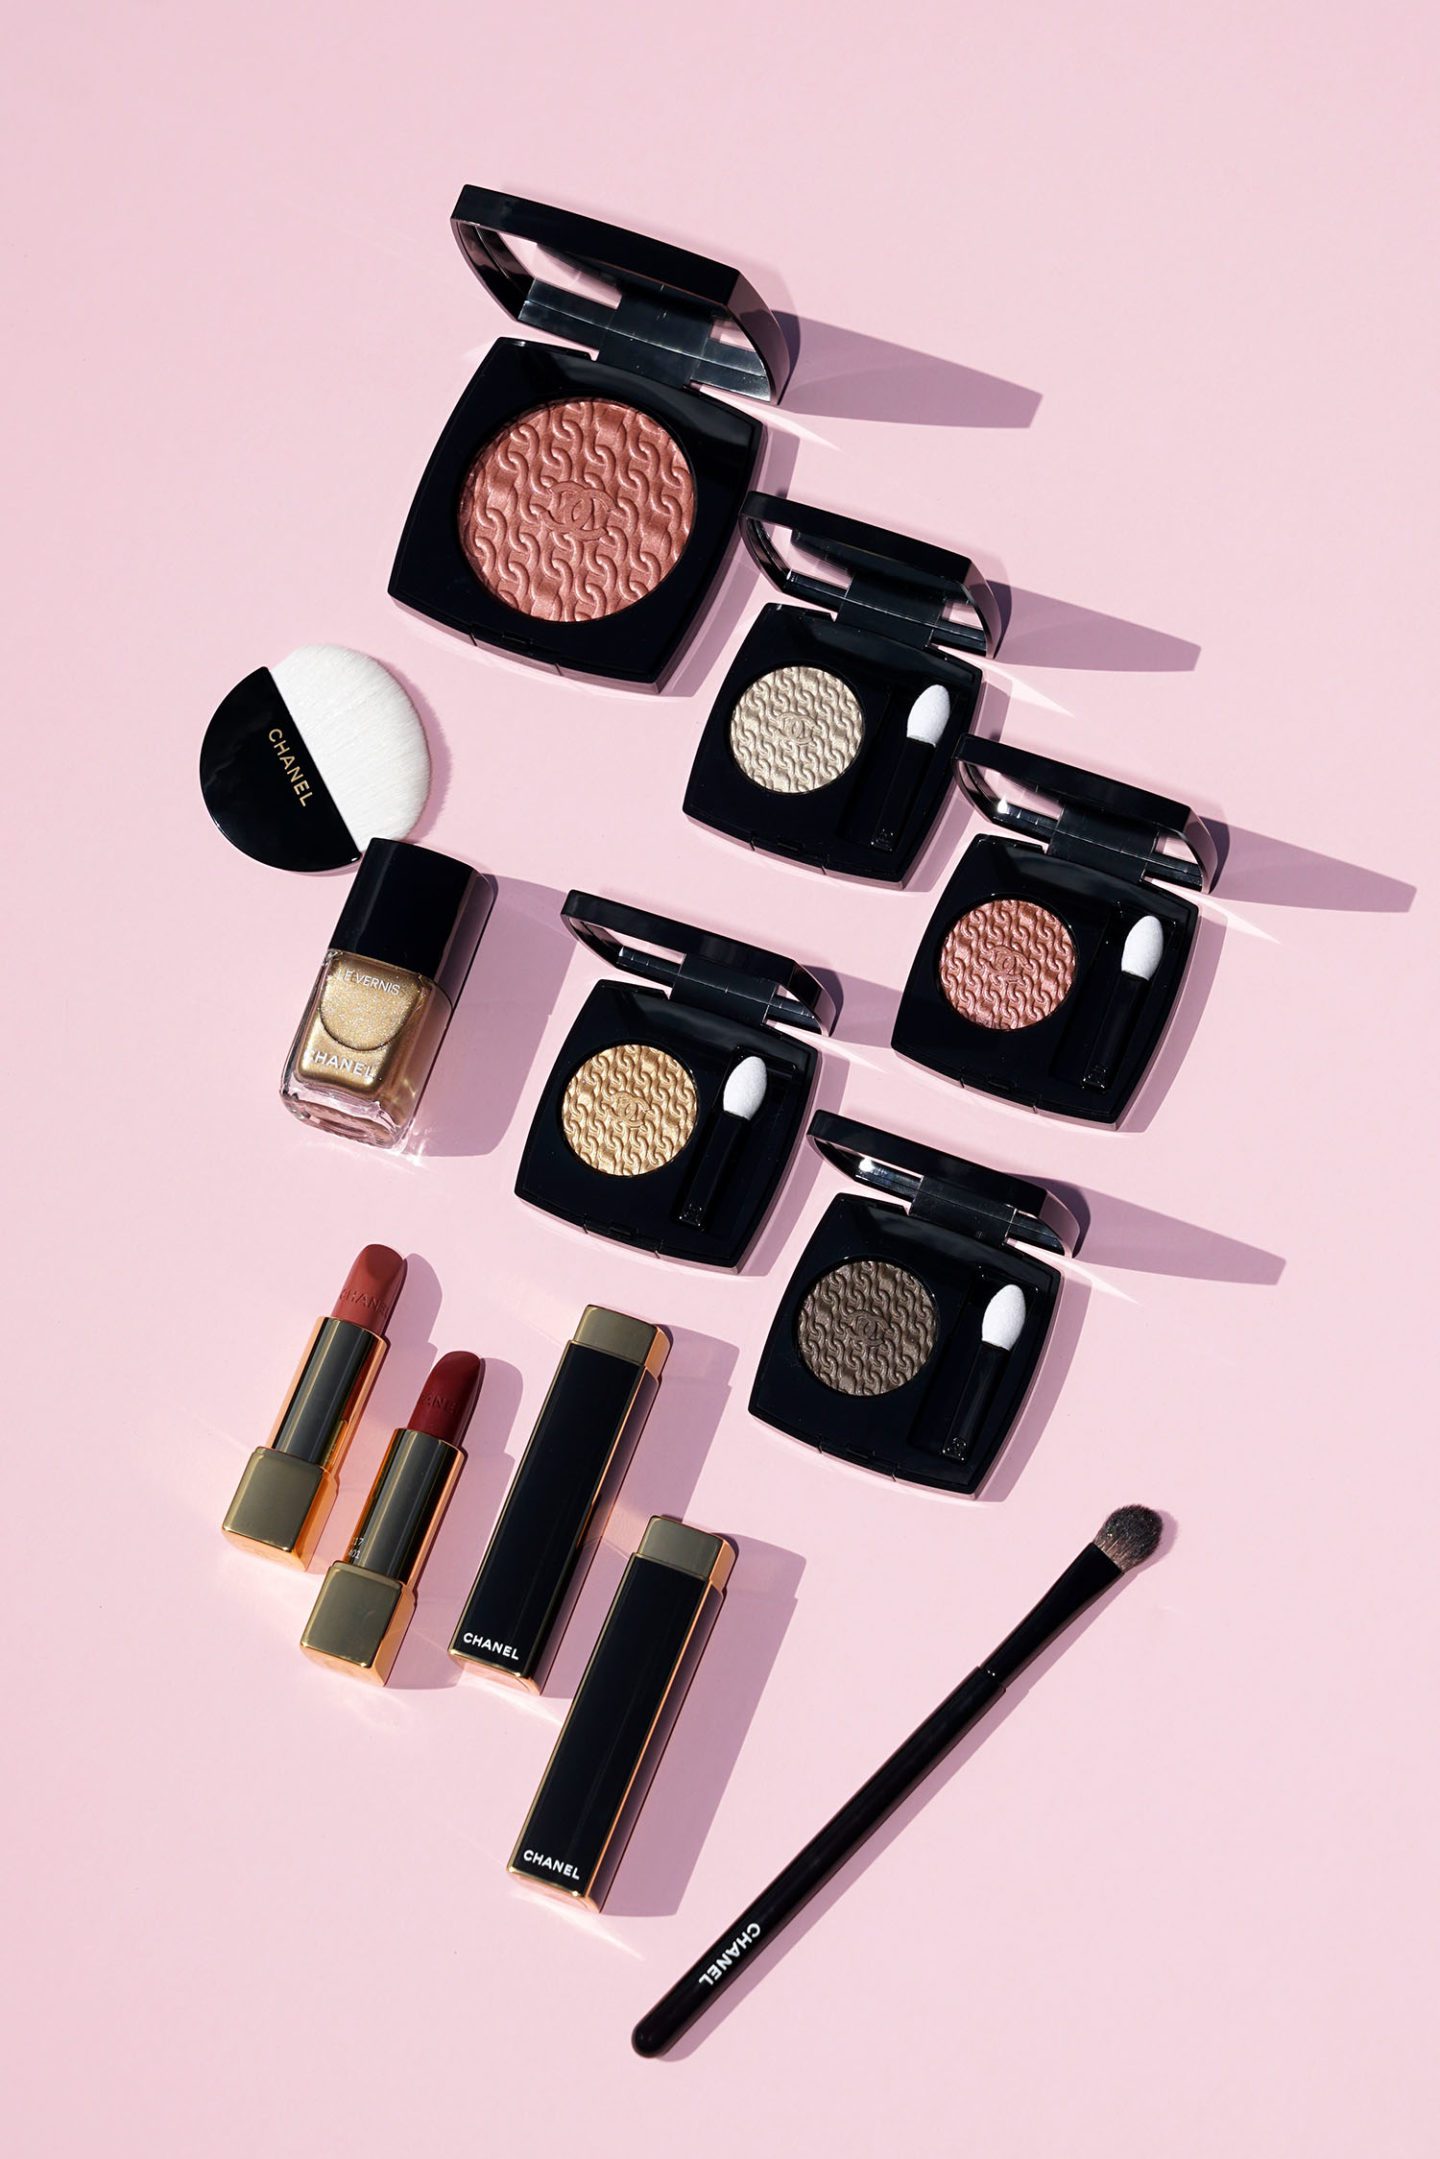 Chanel Holiday 2020 | The Beauty Look Book